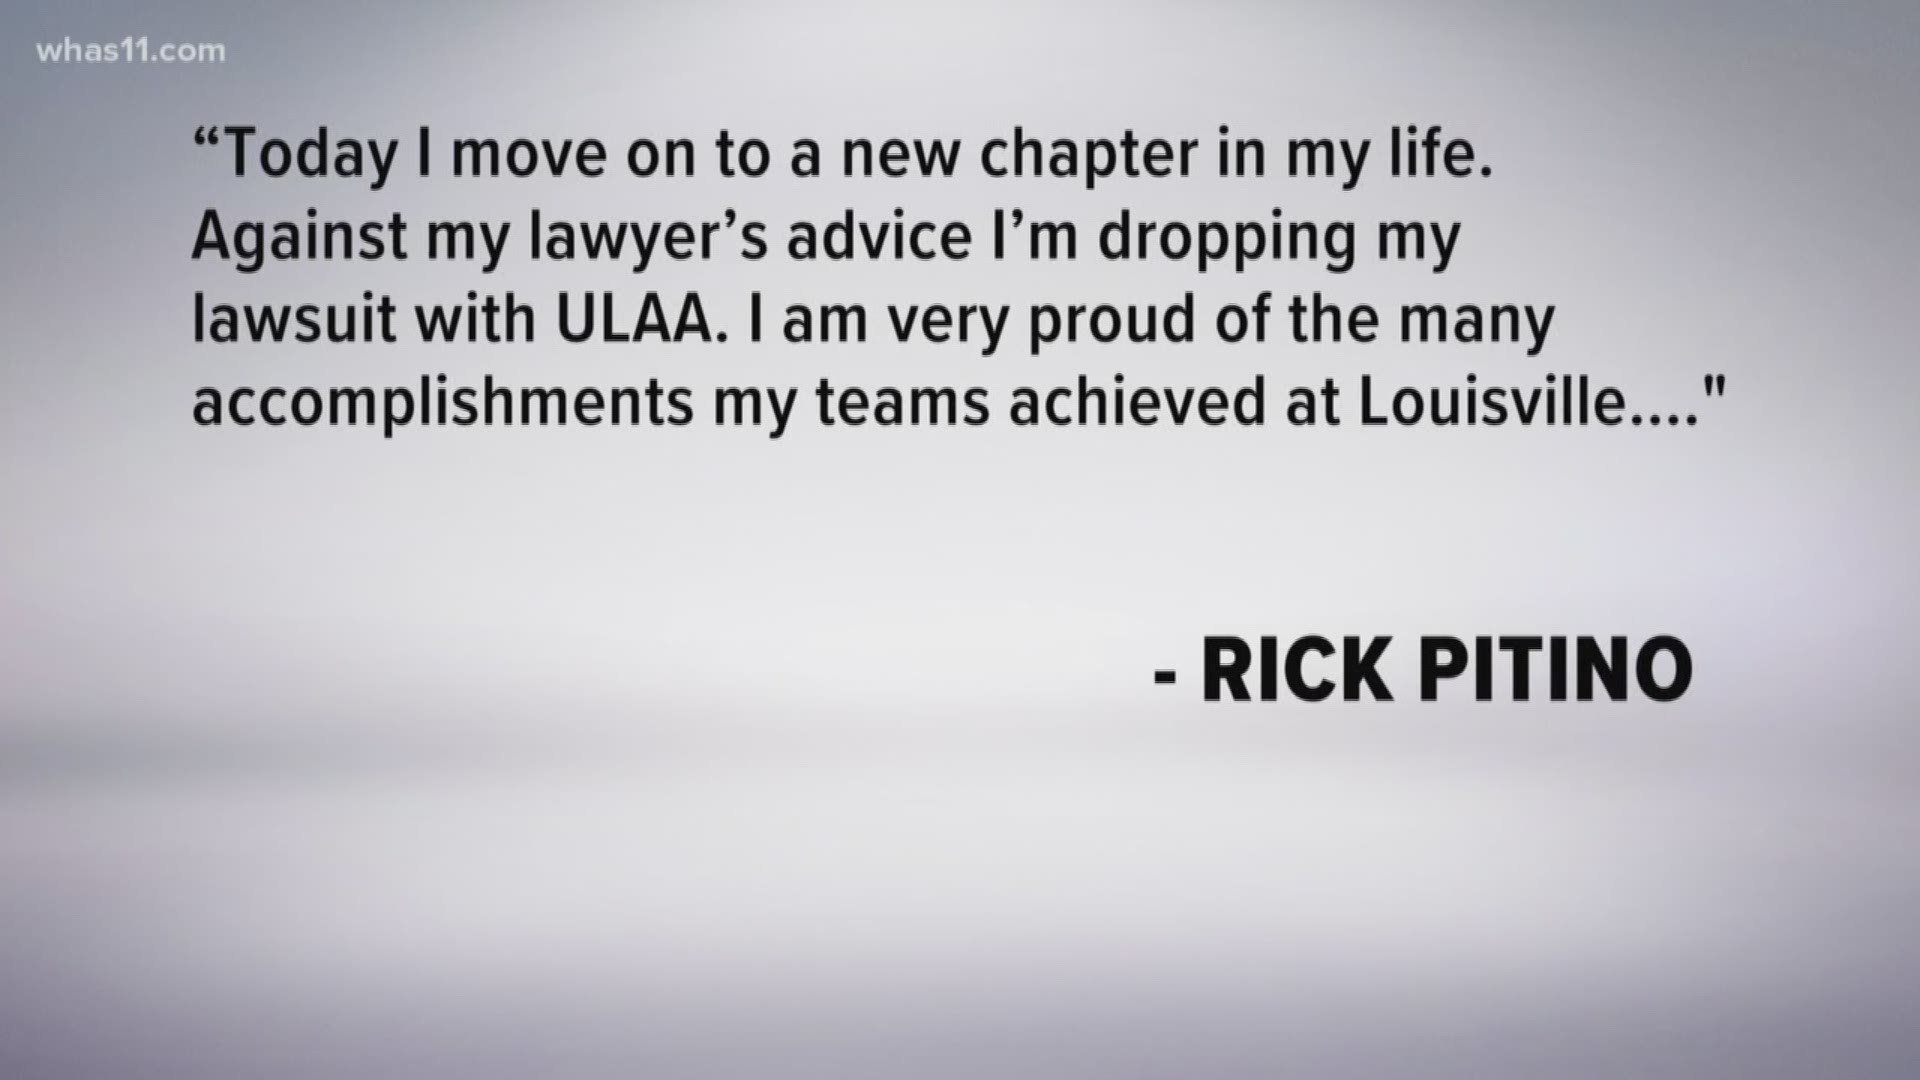 No money changes hands and Rick Pitino can say he resigned.